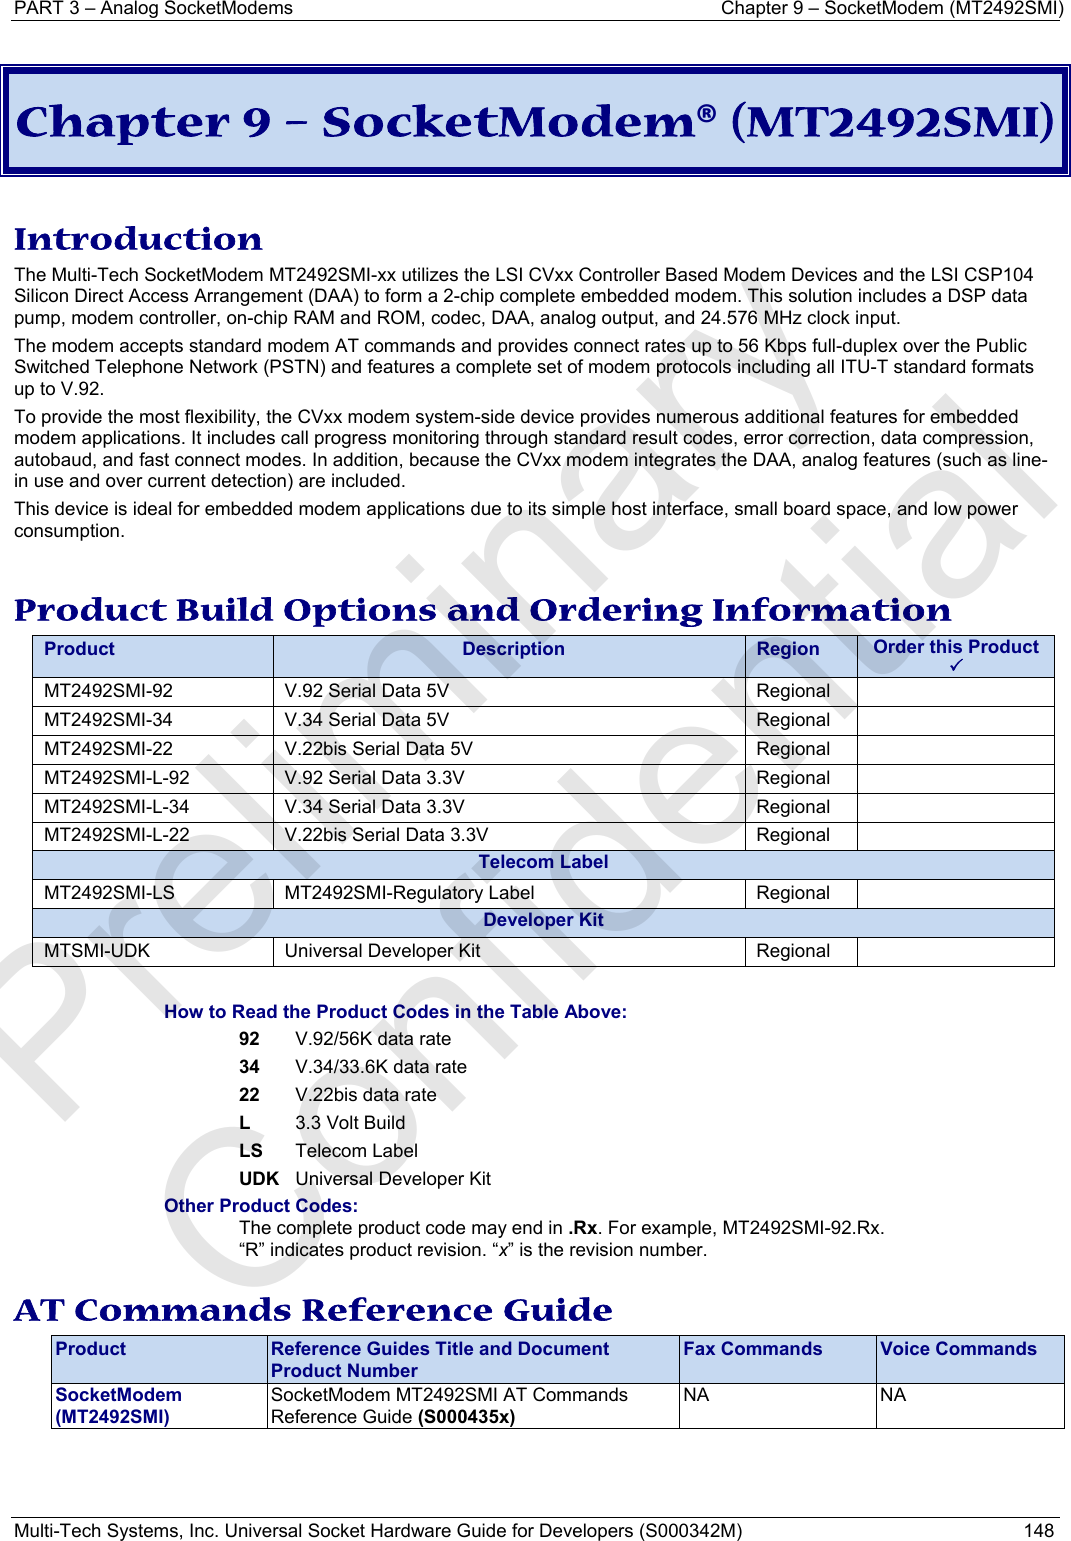 PART 3 – Analog SocketModems     Chapter 9 – SocketModem (MT2492SMI) Multi-Tech Systems, Inc. Universal Socket Hardware Guide for Developers (S000342M)  148   Chapter 9 – SocketModem® (MT2492SMI)  Introduction The Multi-Tech SocketModem MT2492SMI-xx utilizes the LSI CVxx Controller Based Modem Devices and the LSI CSP104 Silicon Direct Access Arrangement (DAA) to form a 2-chip complete embedded modem. This solution includes a DSP data pump, modem controller, on-chip RAM and ROM, codec, DAA, analog output, and 24.576 MHz clock input.  The modem accepts standard modem AT commands and provides connect rates up to 56 Kbps full-duplex over the Public Switched Telephone Network (PSTN) and features a complete set of modem protocols including all ITU-T standard formats up to V.92.  To provide the most flexibility, the CVxx modem system-side device provides numerous additional features for embedded modem applications. It includes call progress monitoring through standard result codes, error correction, data compression, autobaud, and fast connect modes. In addition, because the CVxx modem integrates the DAA, analog features (such as line-in use and over current detection) are included.  This device is ideal for embedded modem applications due to its simple host interface, small board space, and low power consumption.   Product Build Options and Ordering Information Product  Description  Region  Order this Product 3MT2492SMI-92  V.92 Serial Data 5V           Regional MT2492SMI-34  V.34 Serial Data 5V           Regional MT2492SMI-22  V.22bis Serial Data 5V       Regional MT2492SMI-L-92  V.92 Serial Data 3.3V       Regional   MT2492SMI-L-34  V.34 Serial Data 3.3V       Regional   MT2492SMI-L-22  V.22bis Serial Data 3.3V        Regional   Telecom Label MT2492SMI-LS MT2492SMI-Regulatory Label  Regional  Developer KitMTSMI-UDK  Universal Developer Kit  Regional    How to Read the Product Codes in the Table Above: 92  V.92/56K data rate 34  V.34/33.6K data rate 22  V.22bis data rate L  3.3 Volt Build LS Telecom Label UDK  Universal Developer Kit Other Product Codes: The complete product code may end in .Rx. For example, MT2492SMI-92.Rx.   “R” indicates product revision. “x” is the revision number.  AT Commands Reference Guide Product  Reference Guides Title and Document Product Number Fax Commands  Voice Commands SocketModem  (MT2492SMI) SocketModem MT2492SMI AT Commands Reference Guide (S000435x)  NA NA    Preliminary  Confidential